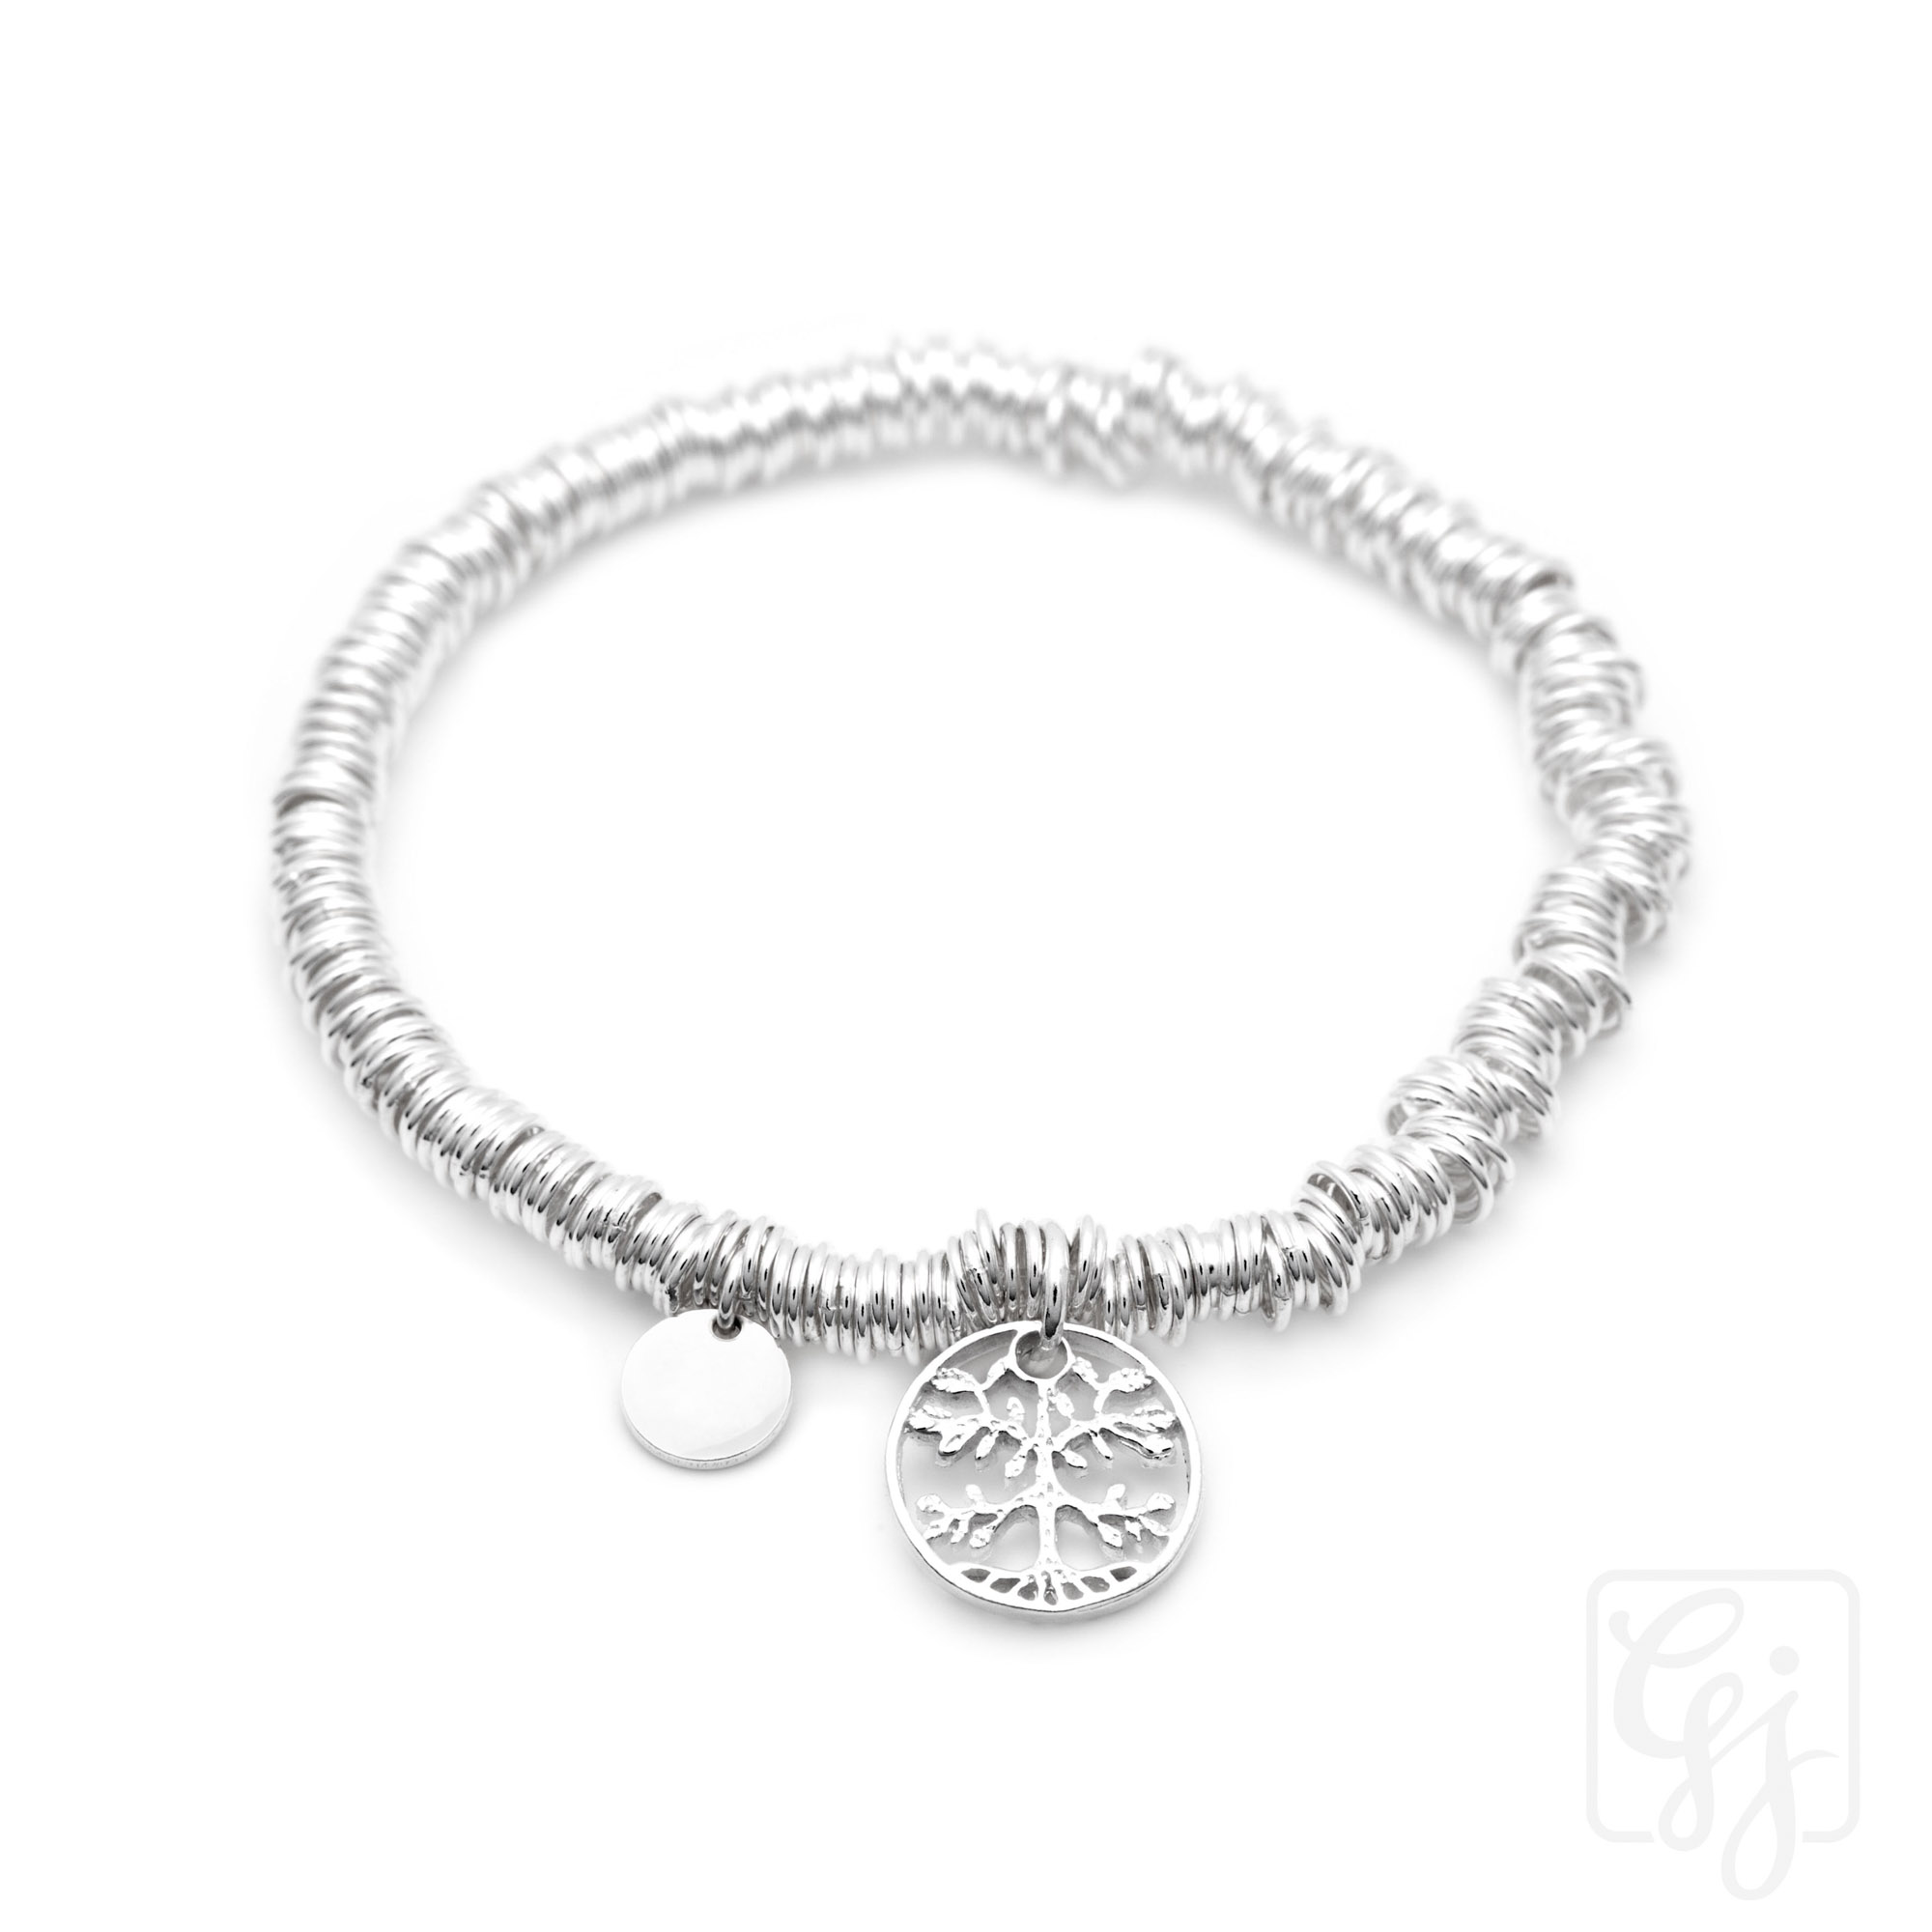 Gillian's Jewellery - 165-Sterling Silver bracelet with Tree of Life charm $99.90